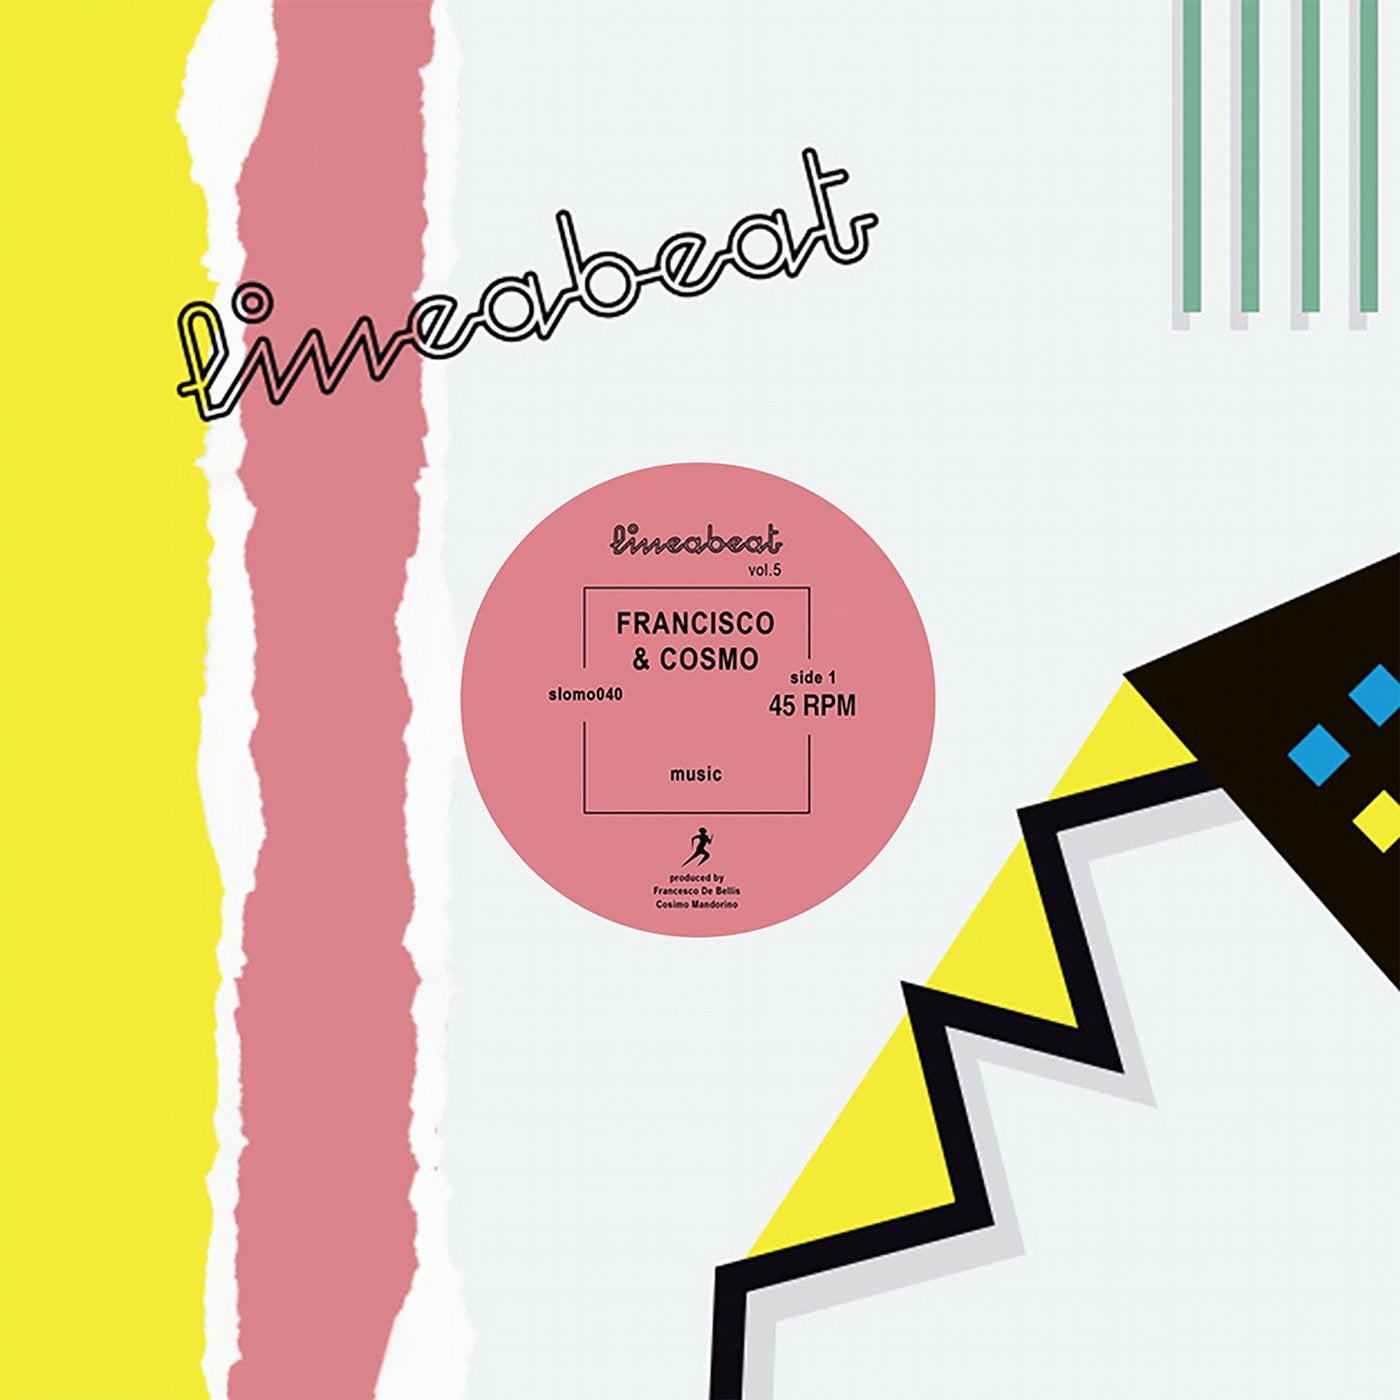 Lineabeat Vol.5